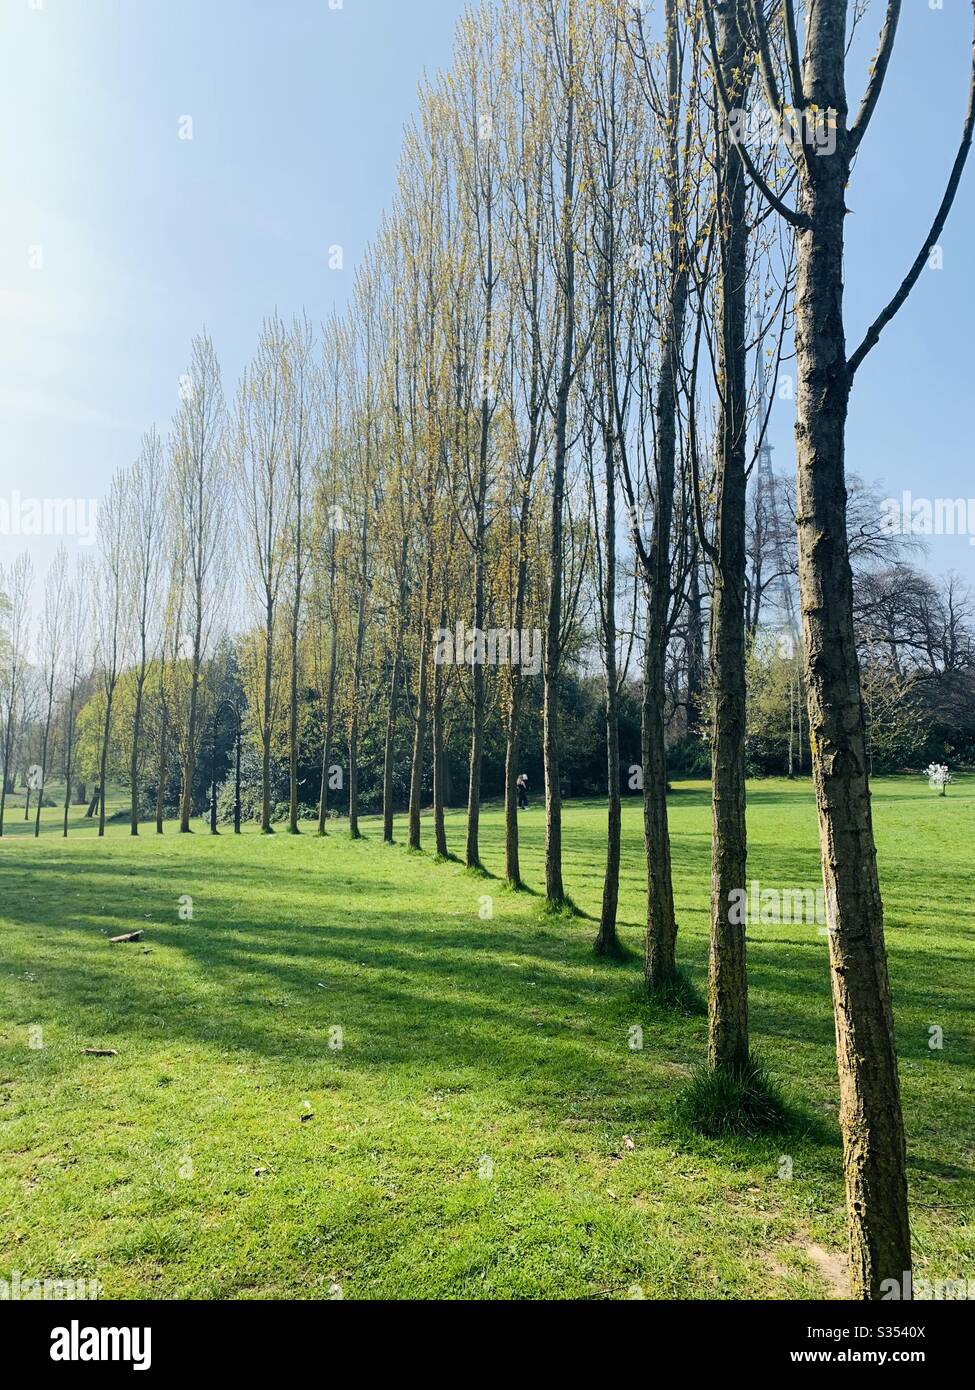 Tall thin trees in a line on a sunny day Stock Photo